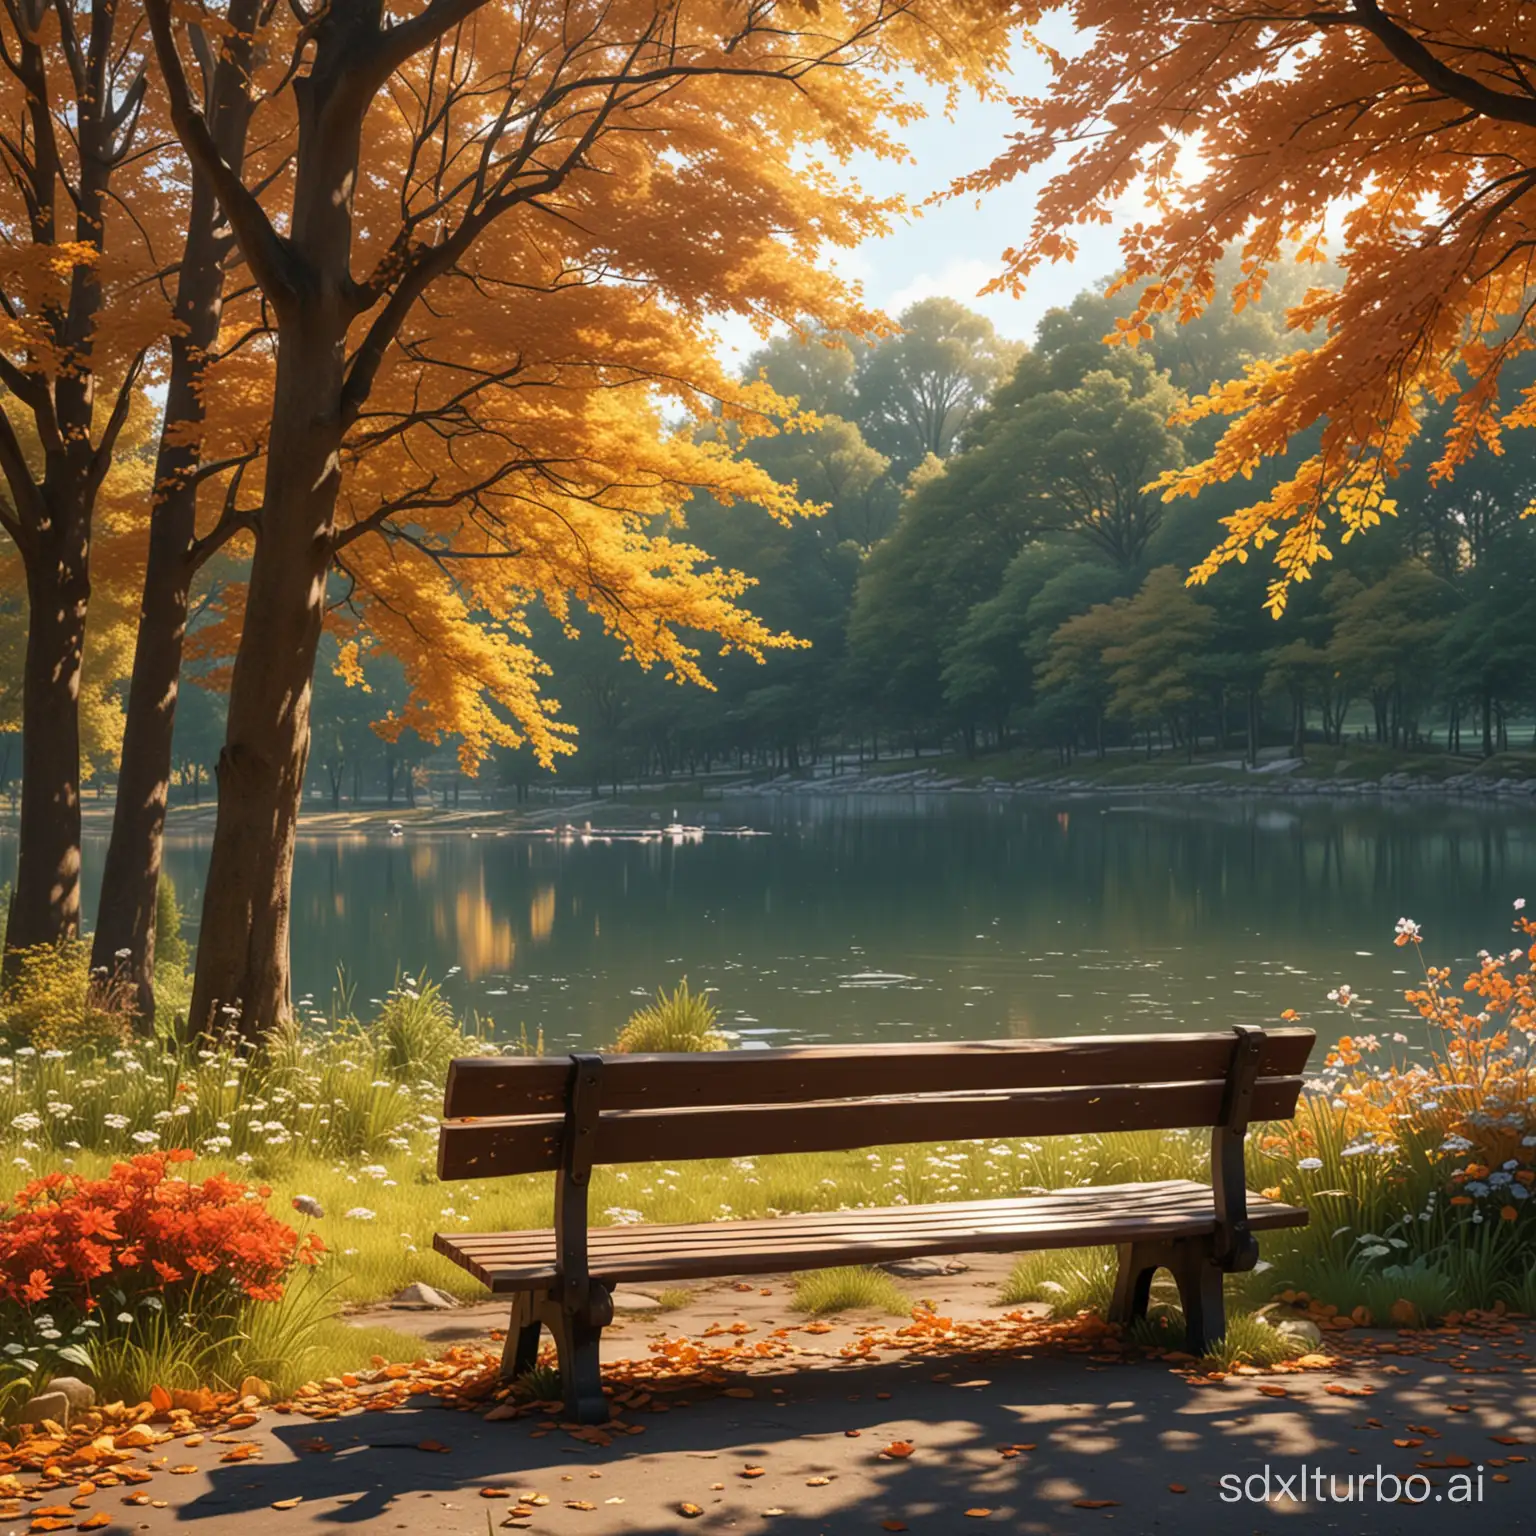 (Masterpiece) Accurate anime 8K wallpaper of a bench in a park near a lake with patches of flowers in dappled lighting, surrounded by trees and autumn leaves, the early morning is quiet and deserted. (Highest quality)